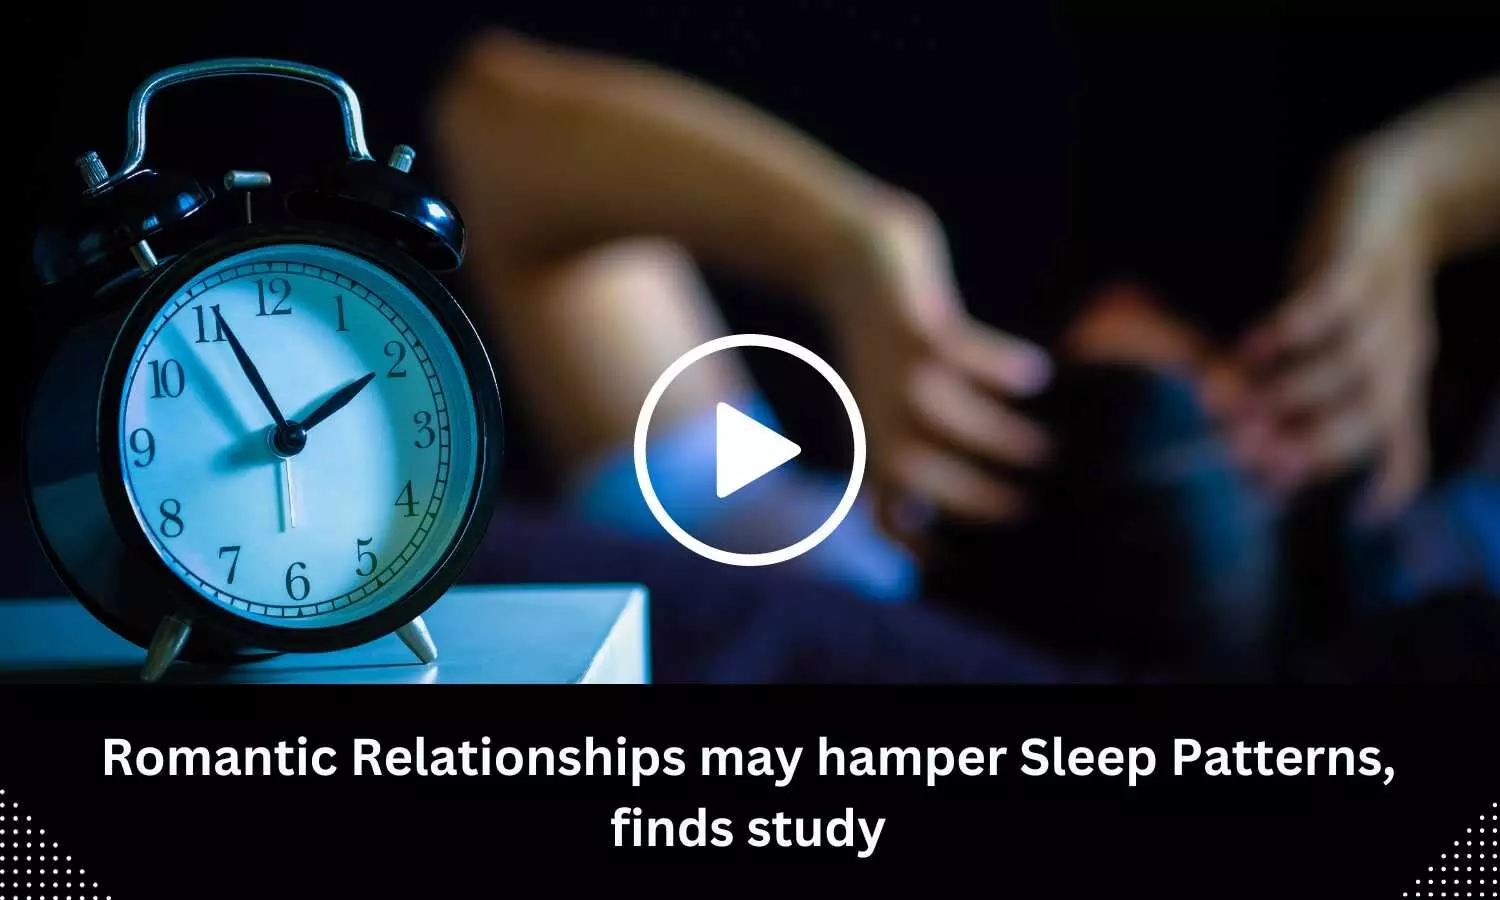 Romantic Relationships may hamper Sleep Patterns, finds study